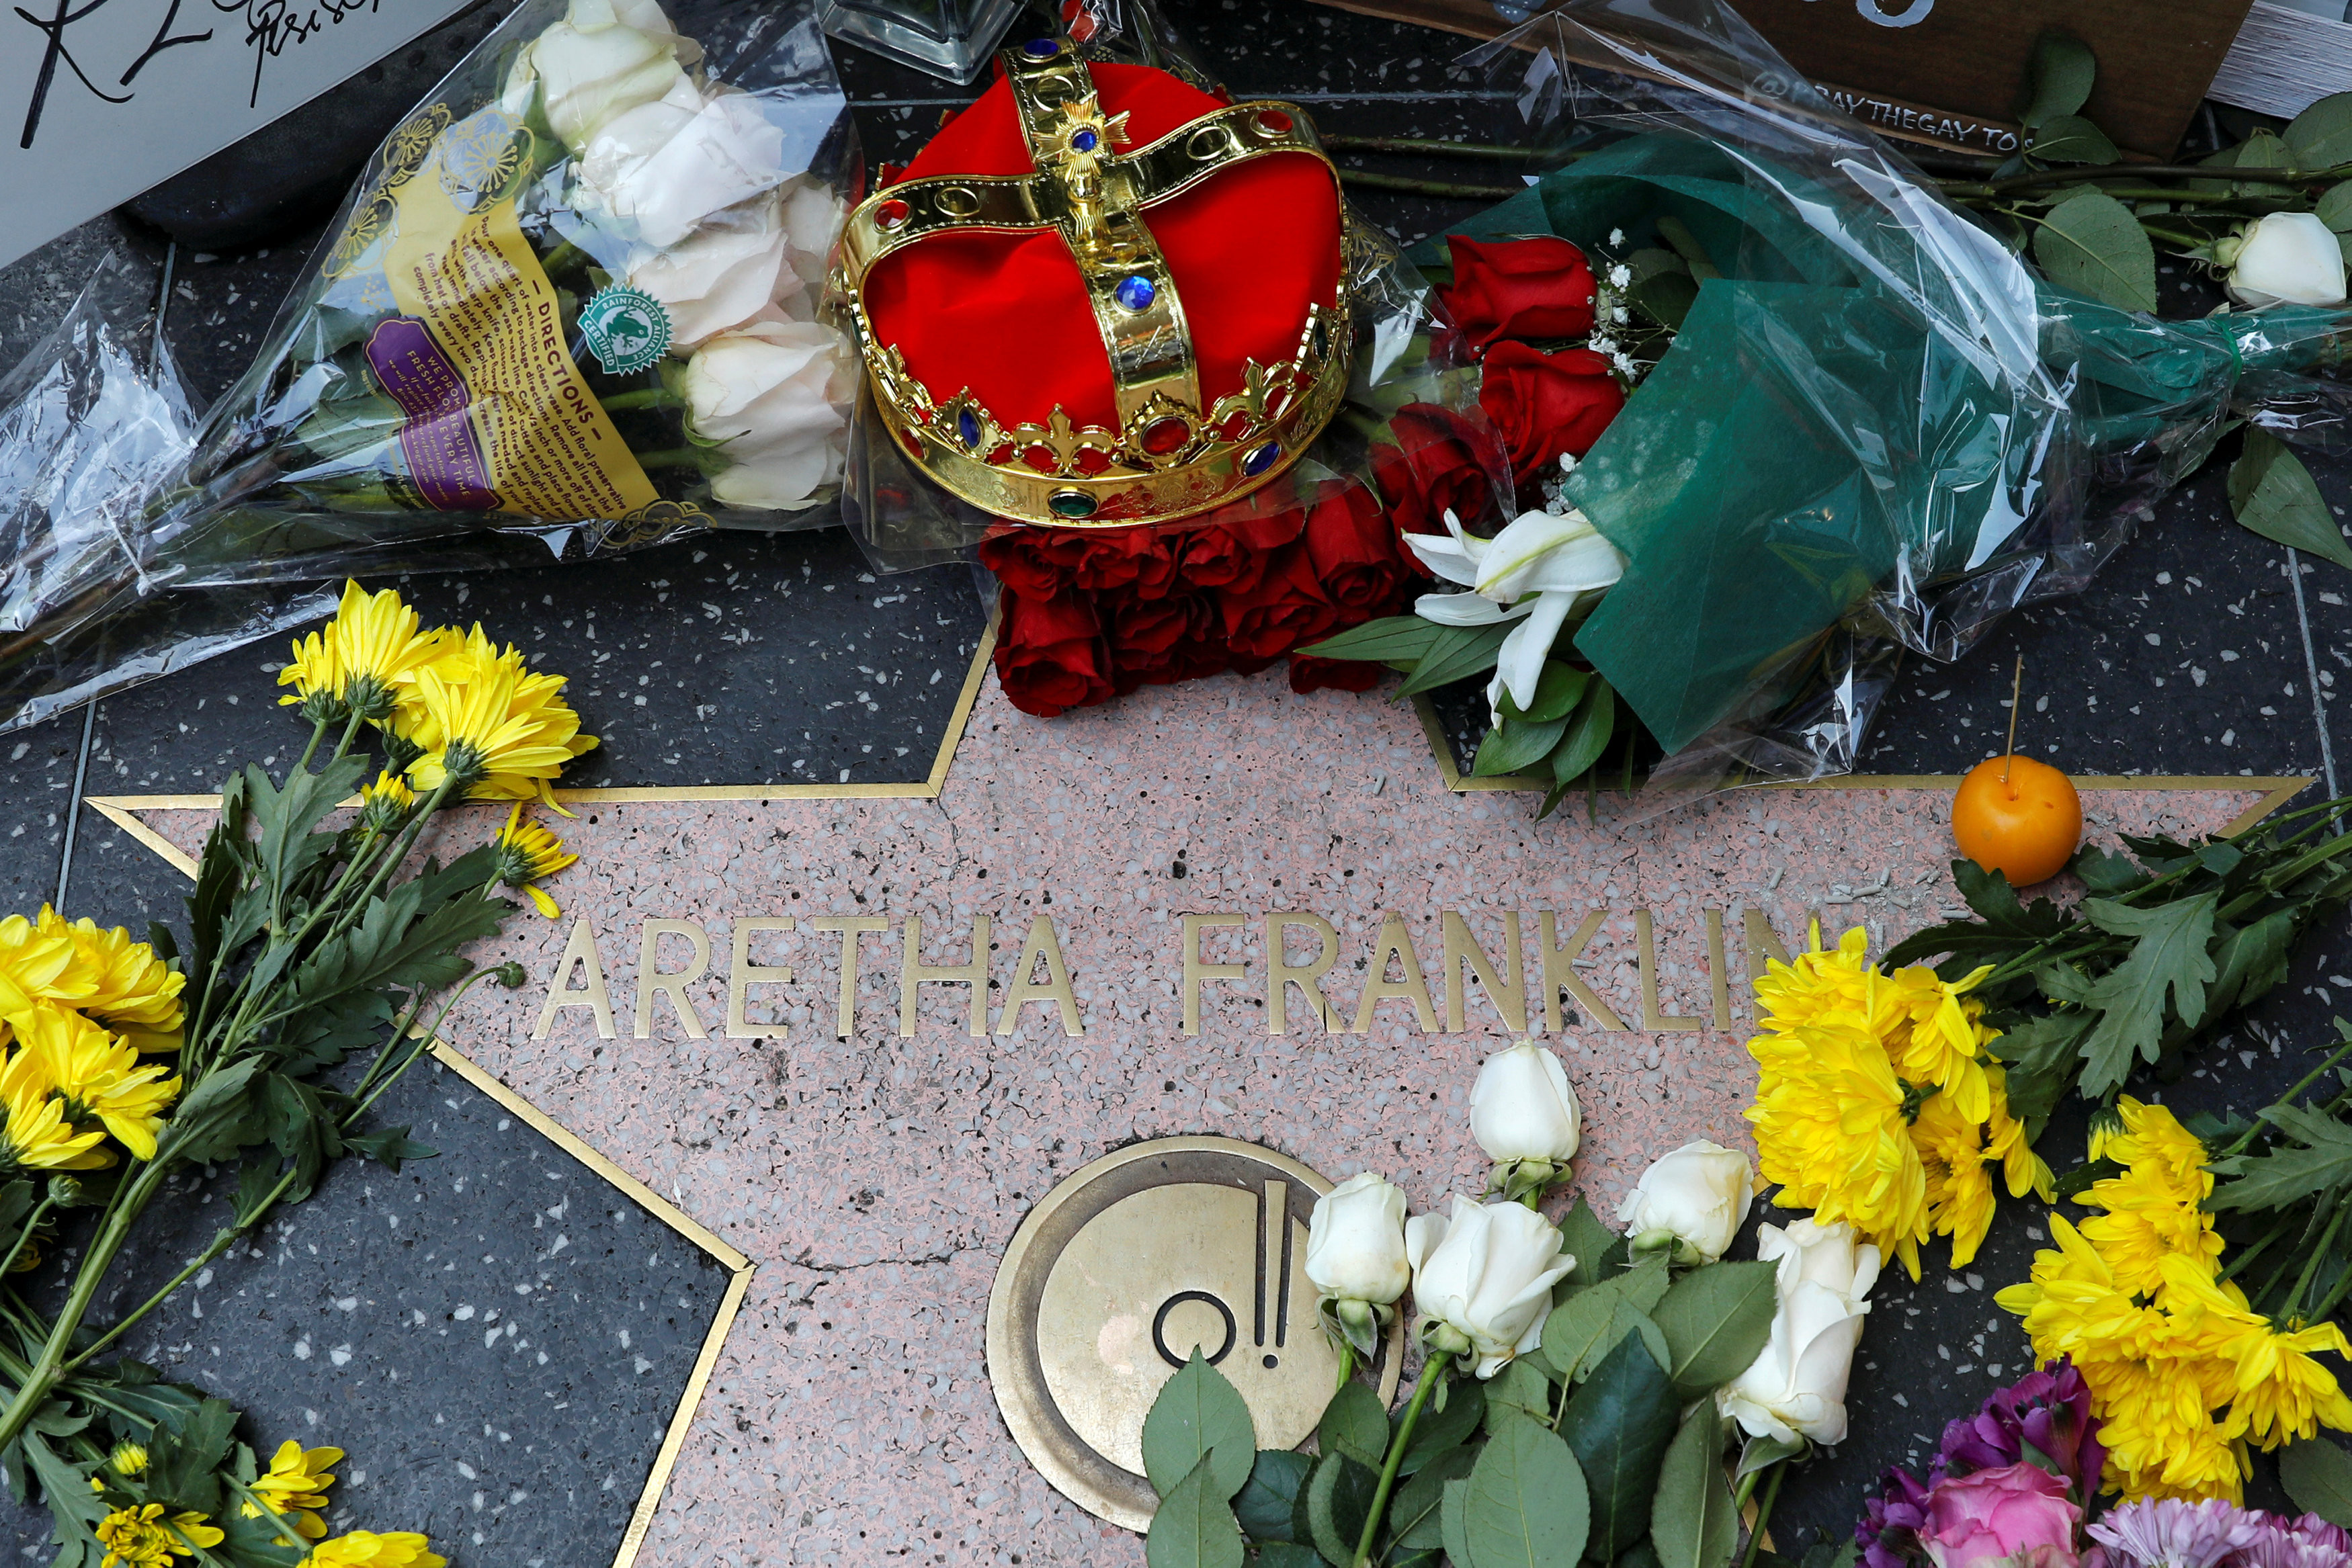 17 Lovely Star Wars Flower Vase 2024 free download star wars flower vase of aretha franklin funeral set for august 31 in detroit inside a crown and flowers were placed on aretha franklins star on hollywood boulevard in los angeles